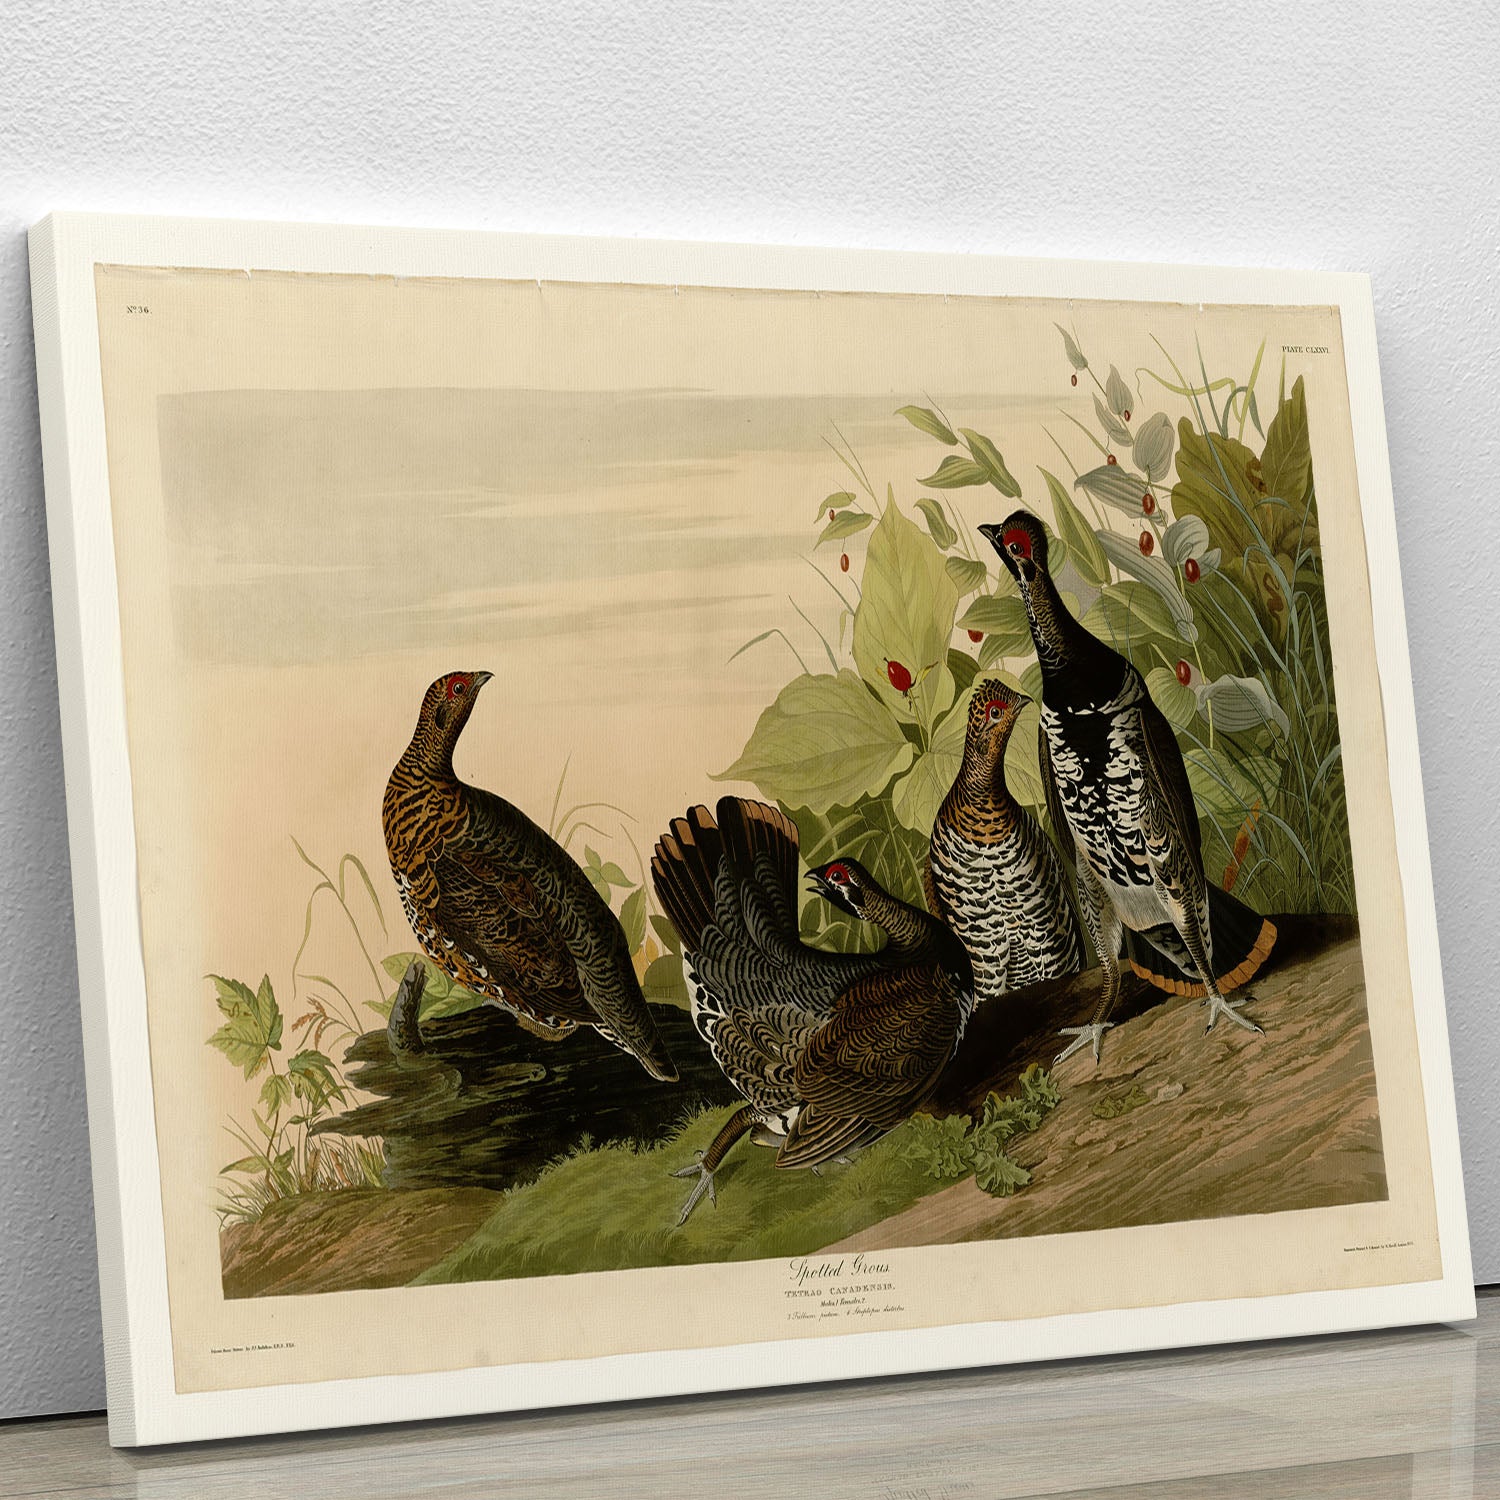 Spotted Grouse by Audubon Canvas Print or Poster - Canvas Art Rocks - 1